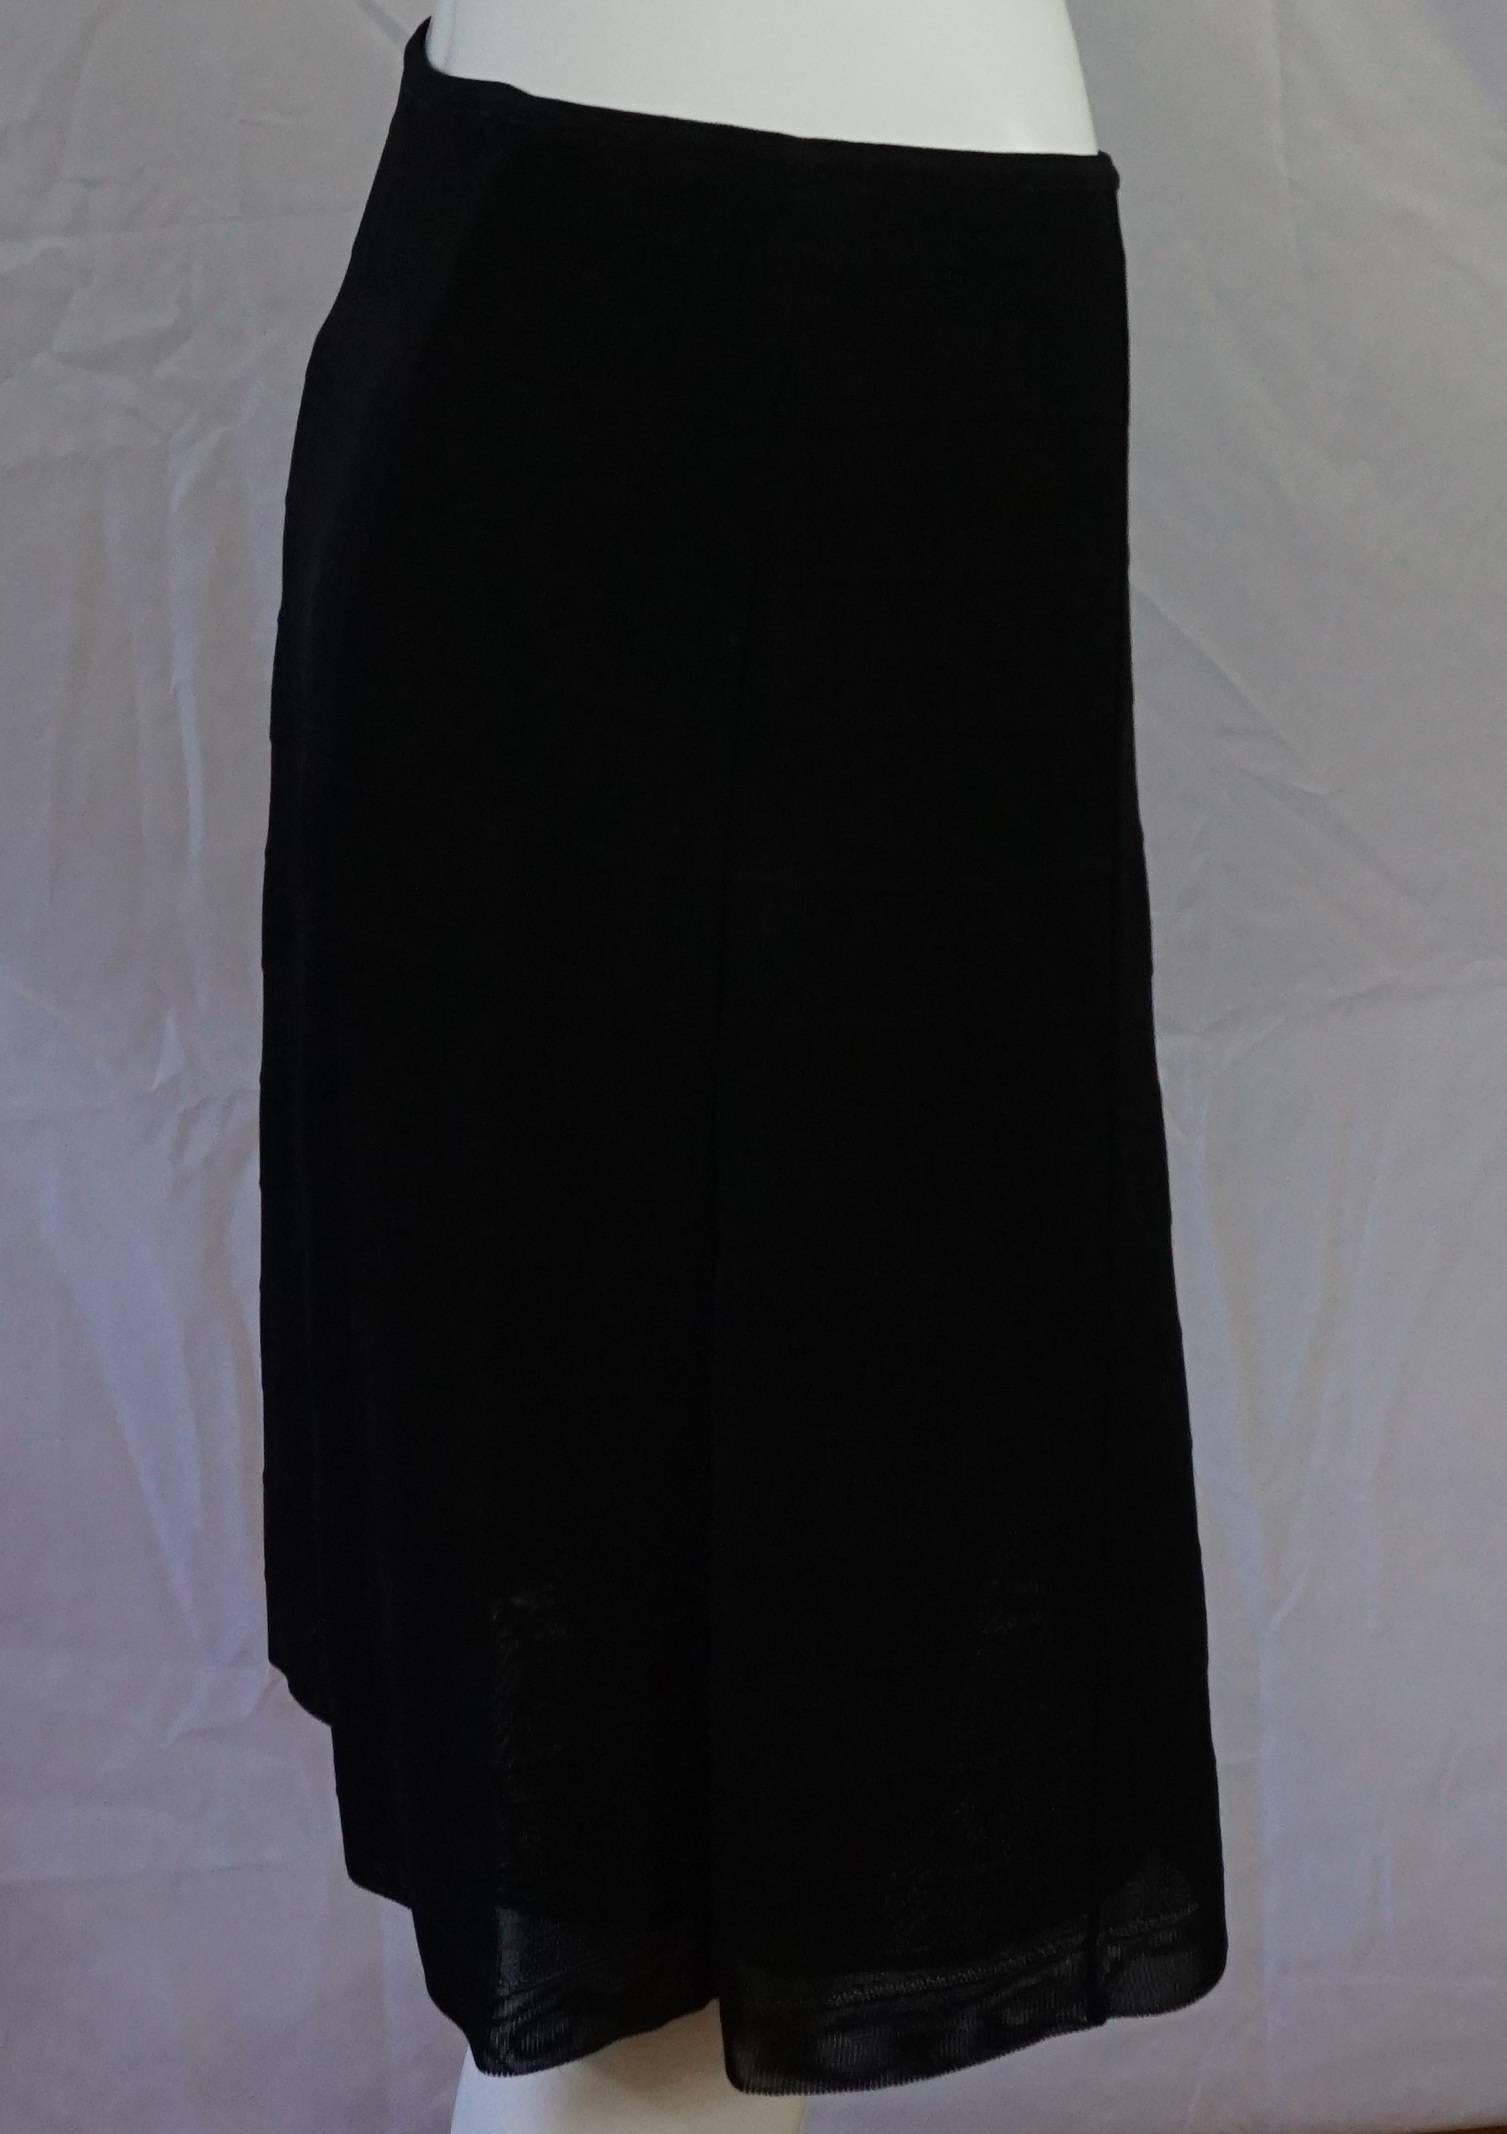 Chanel Black Knit 2 layer skirt - 44- 07c   This beautiful textured knit skirt has a nice stretch fabric made of viscose and rayon. It has a rectangular panel design in the knit, with a cc metallic logo on the left top waist area.  This skirt is in